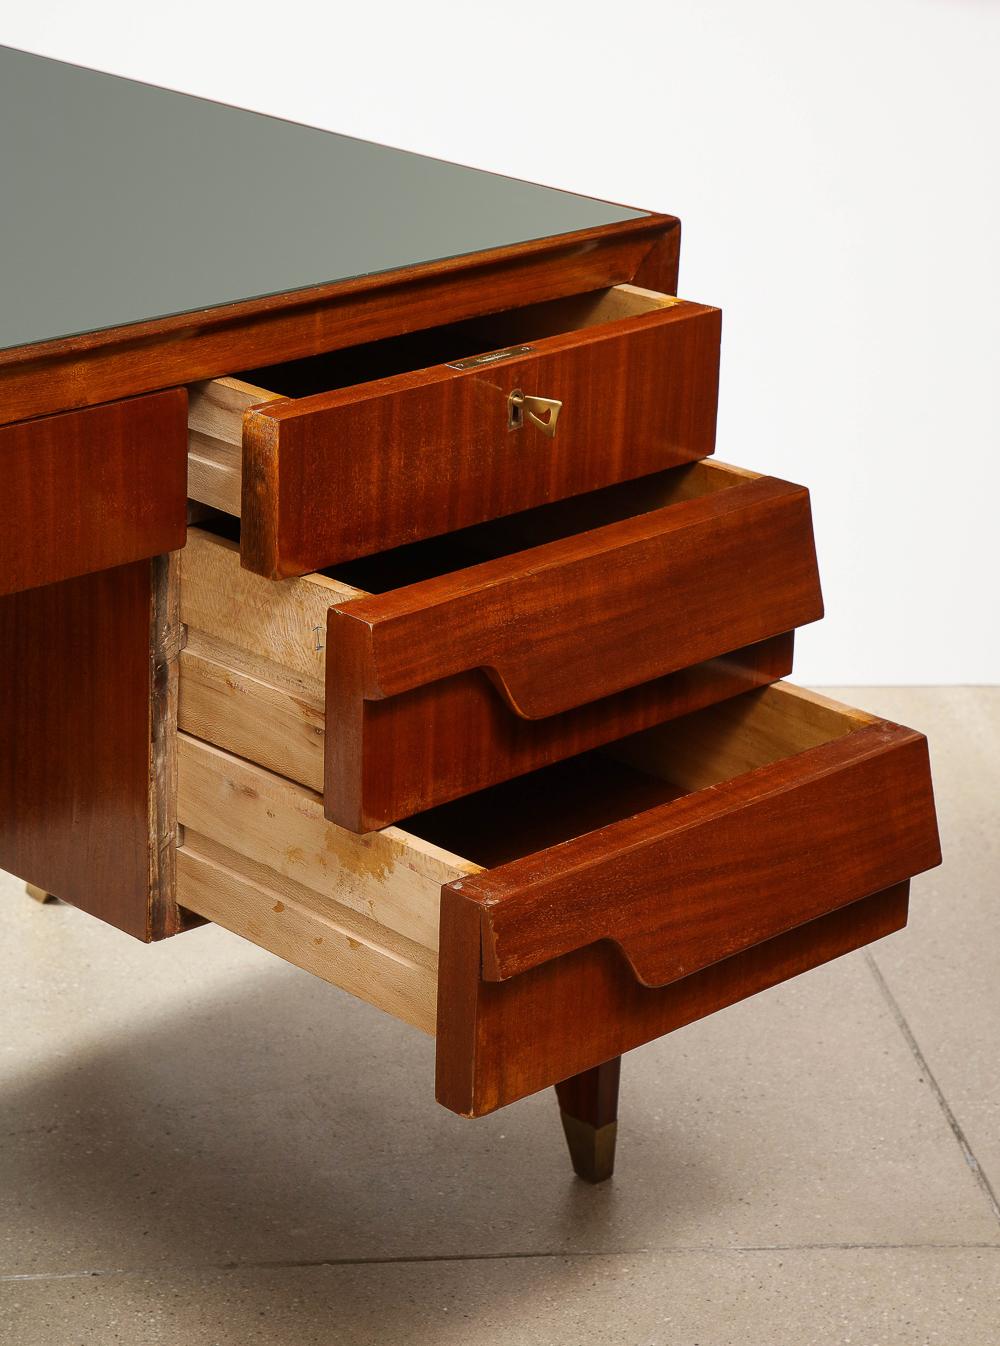 Hand-Crafted Rare Desk by Gio Ponti